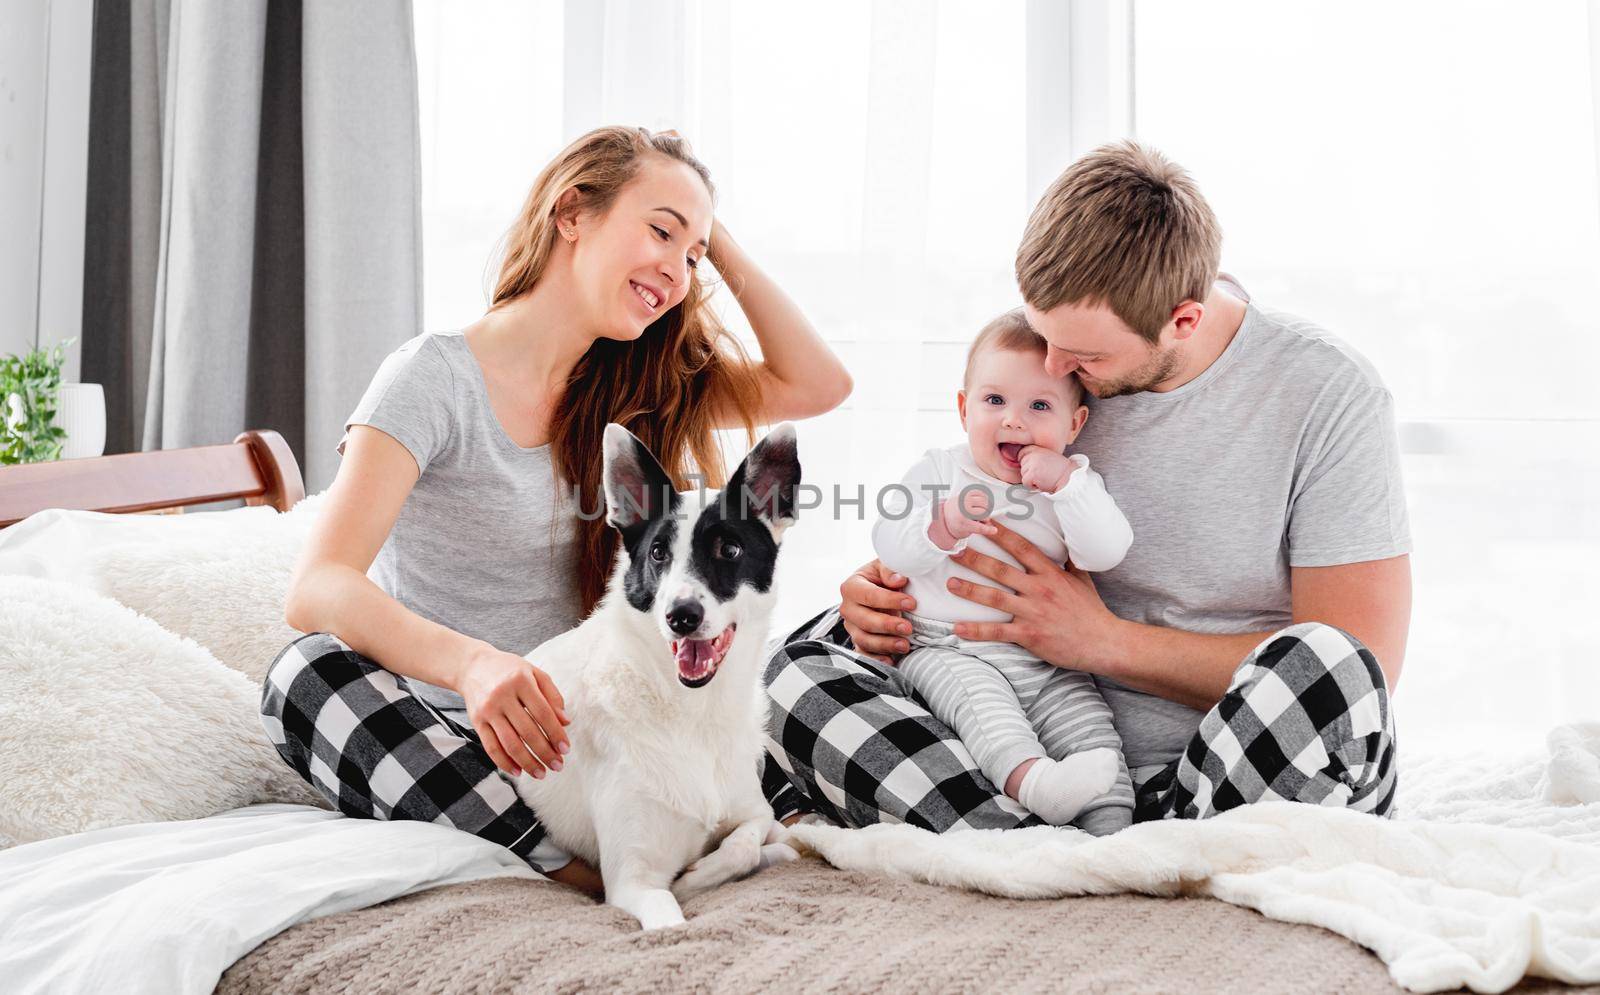 Family with dog in the bed by tan4ikk1